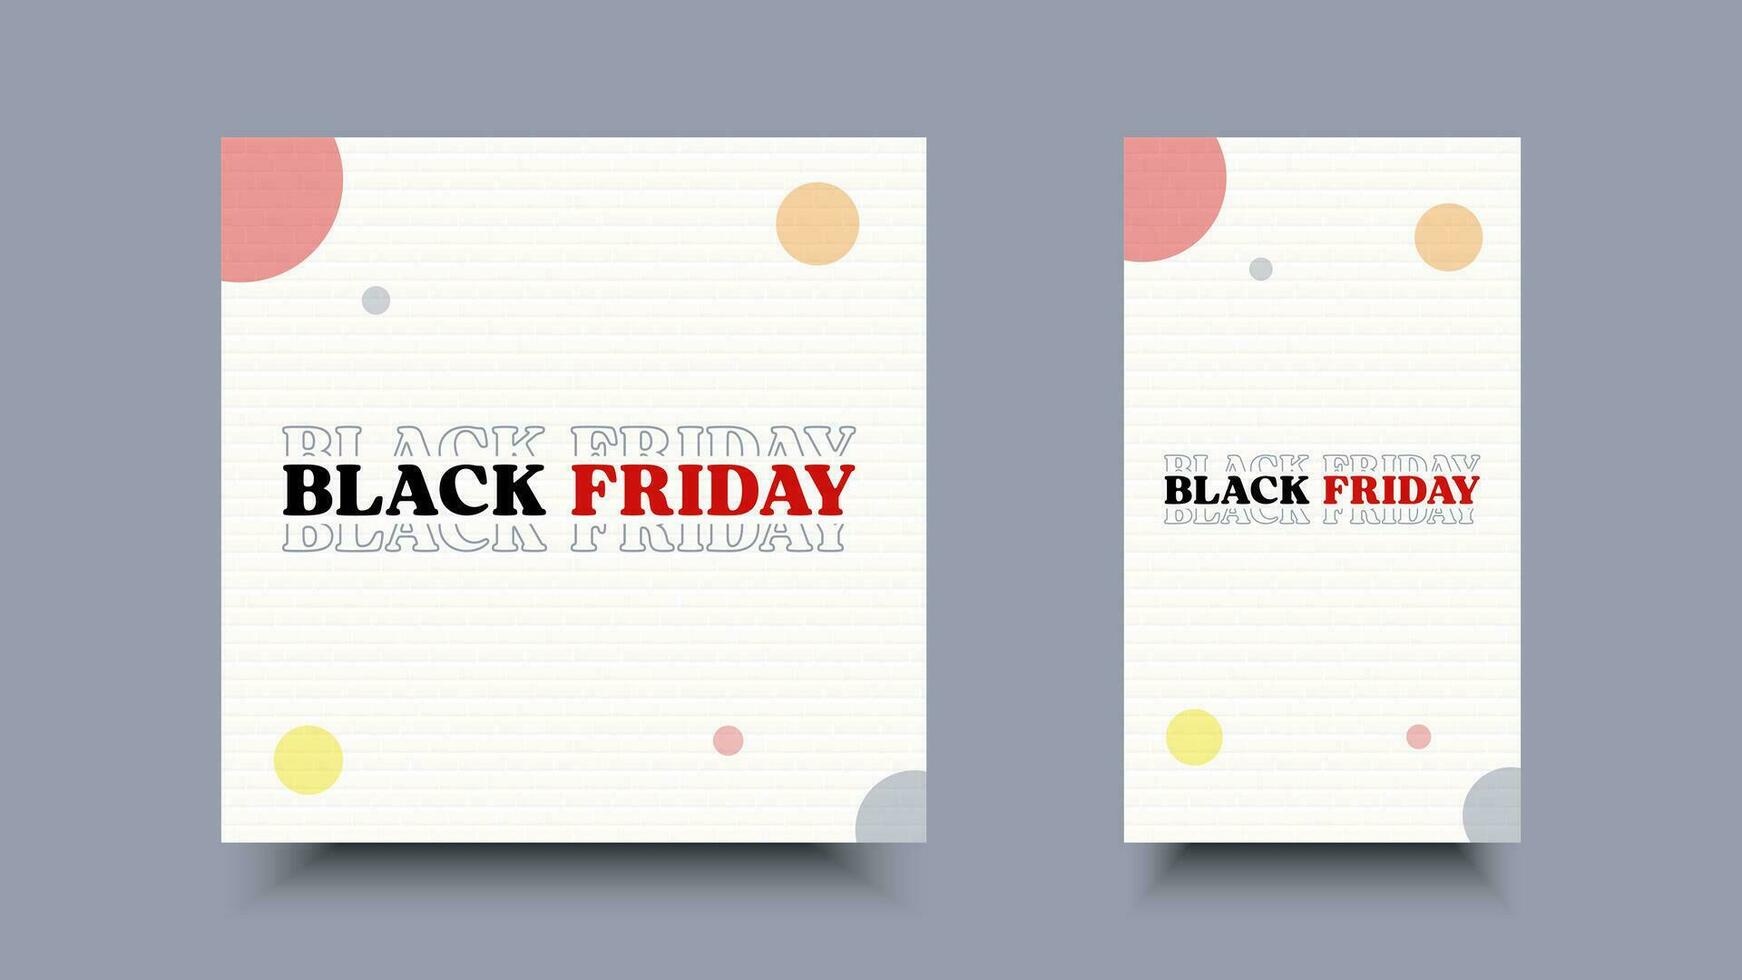 Black friday sale design. Illustration of glowing brick wall and flag ornament for promotion, advertising, banner, background vector